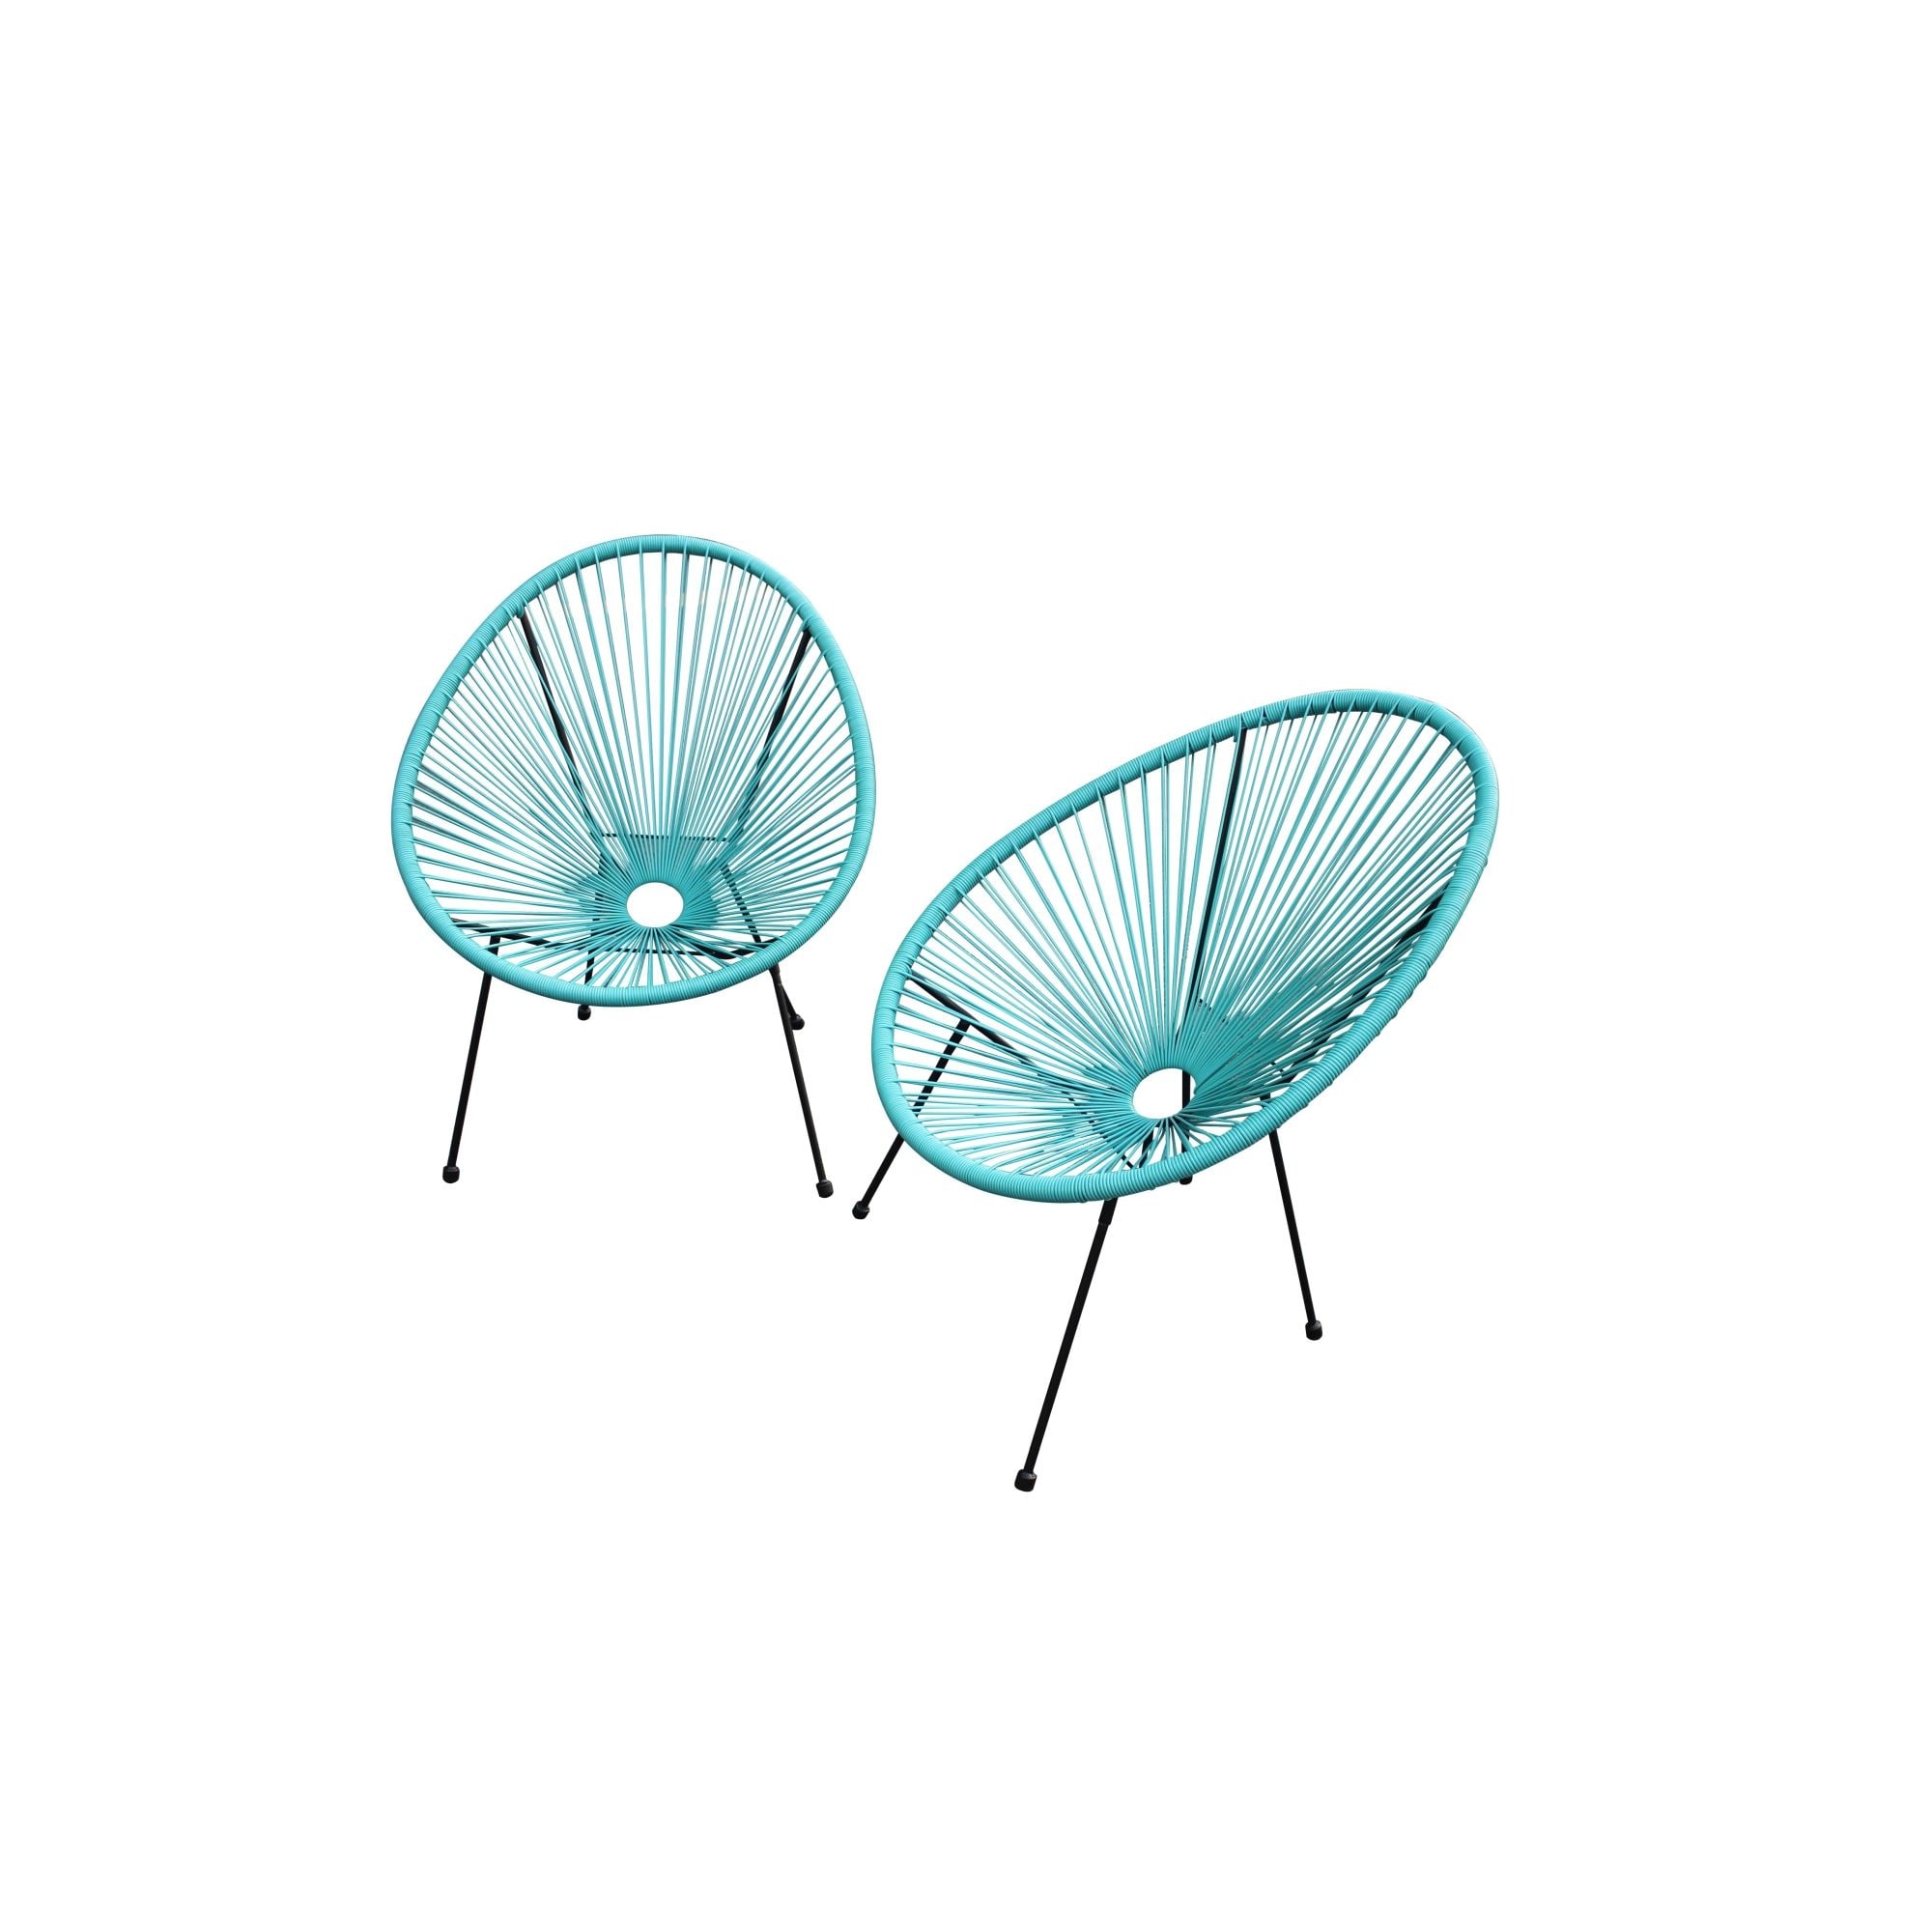 Luxury Living Furniture Egg Shaped Papasan Acapulco Chair Set Of 2 For Indoor And Outdoor Patio Or Poolside - 30 X 28 X34